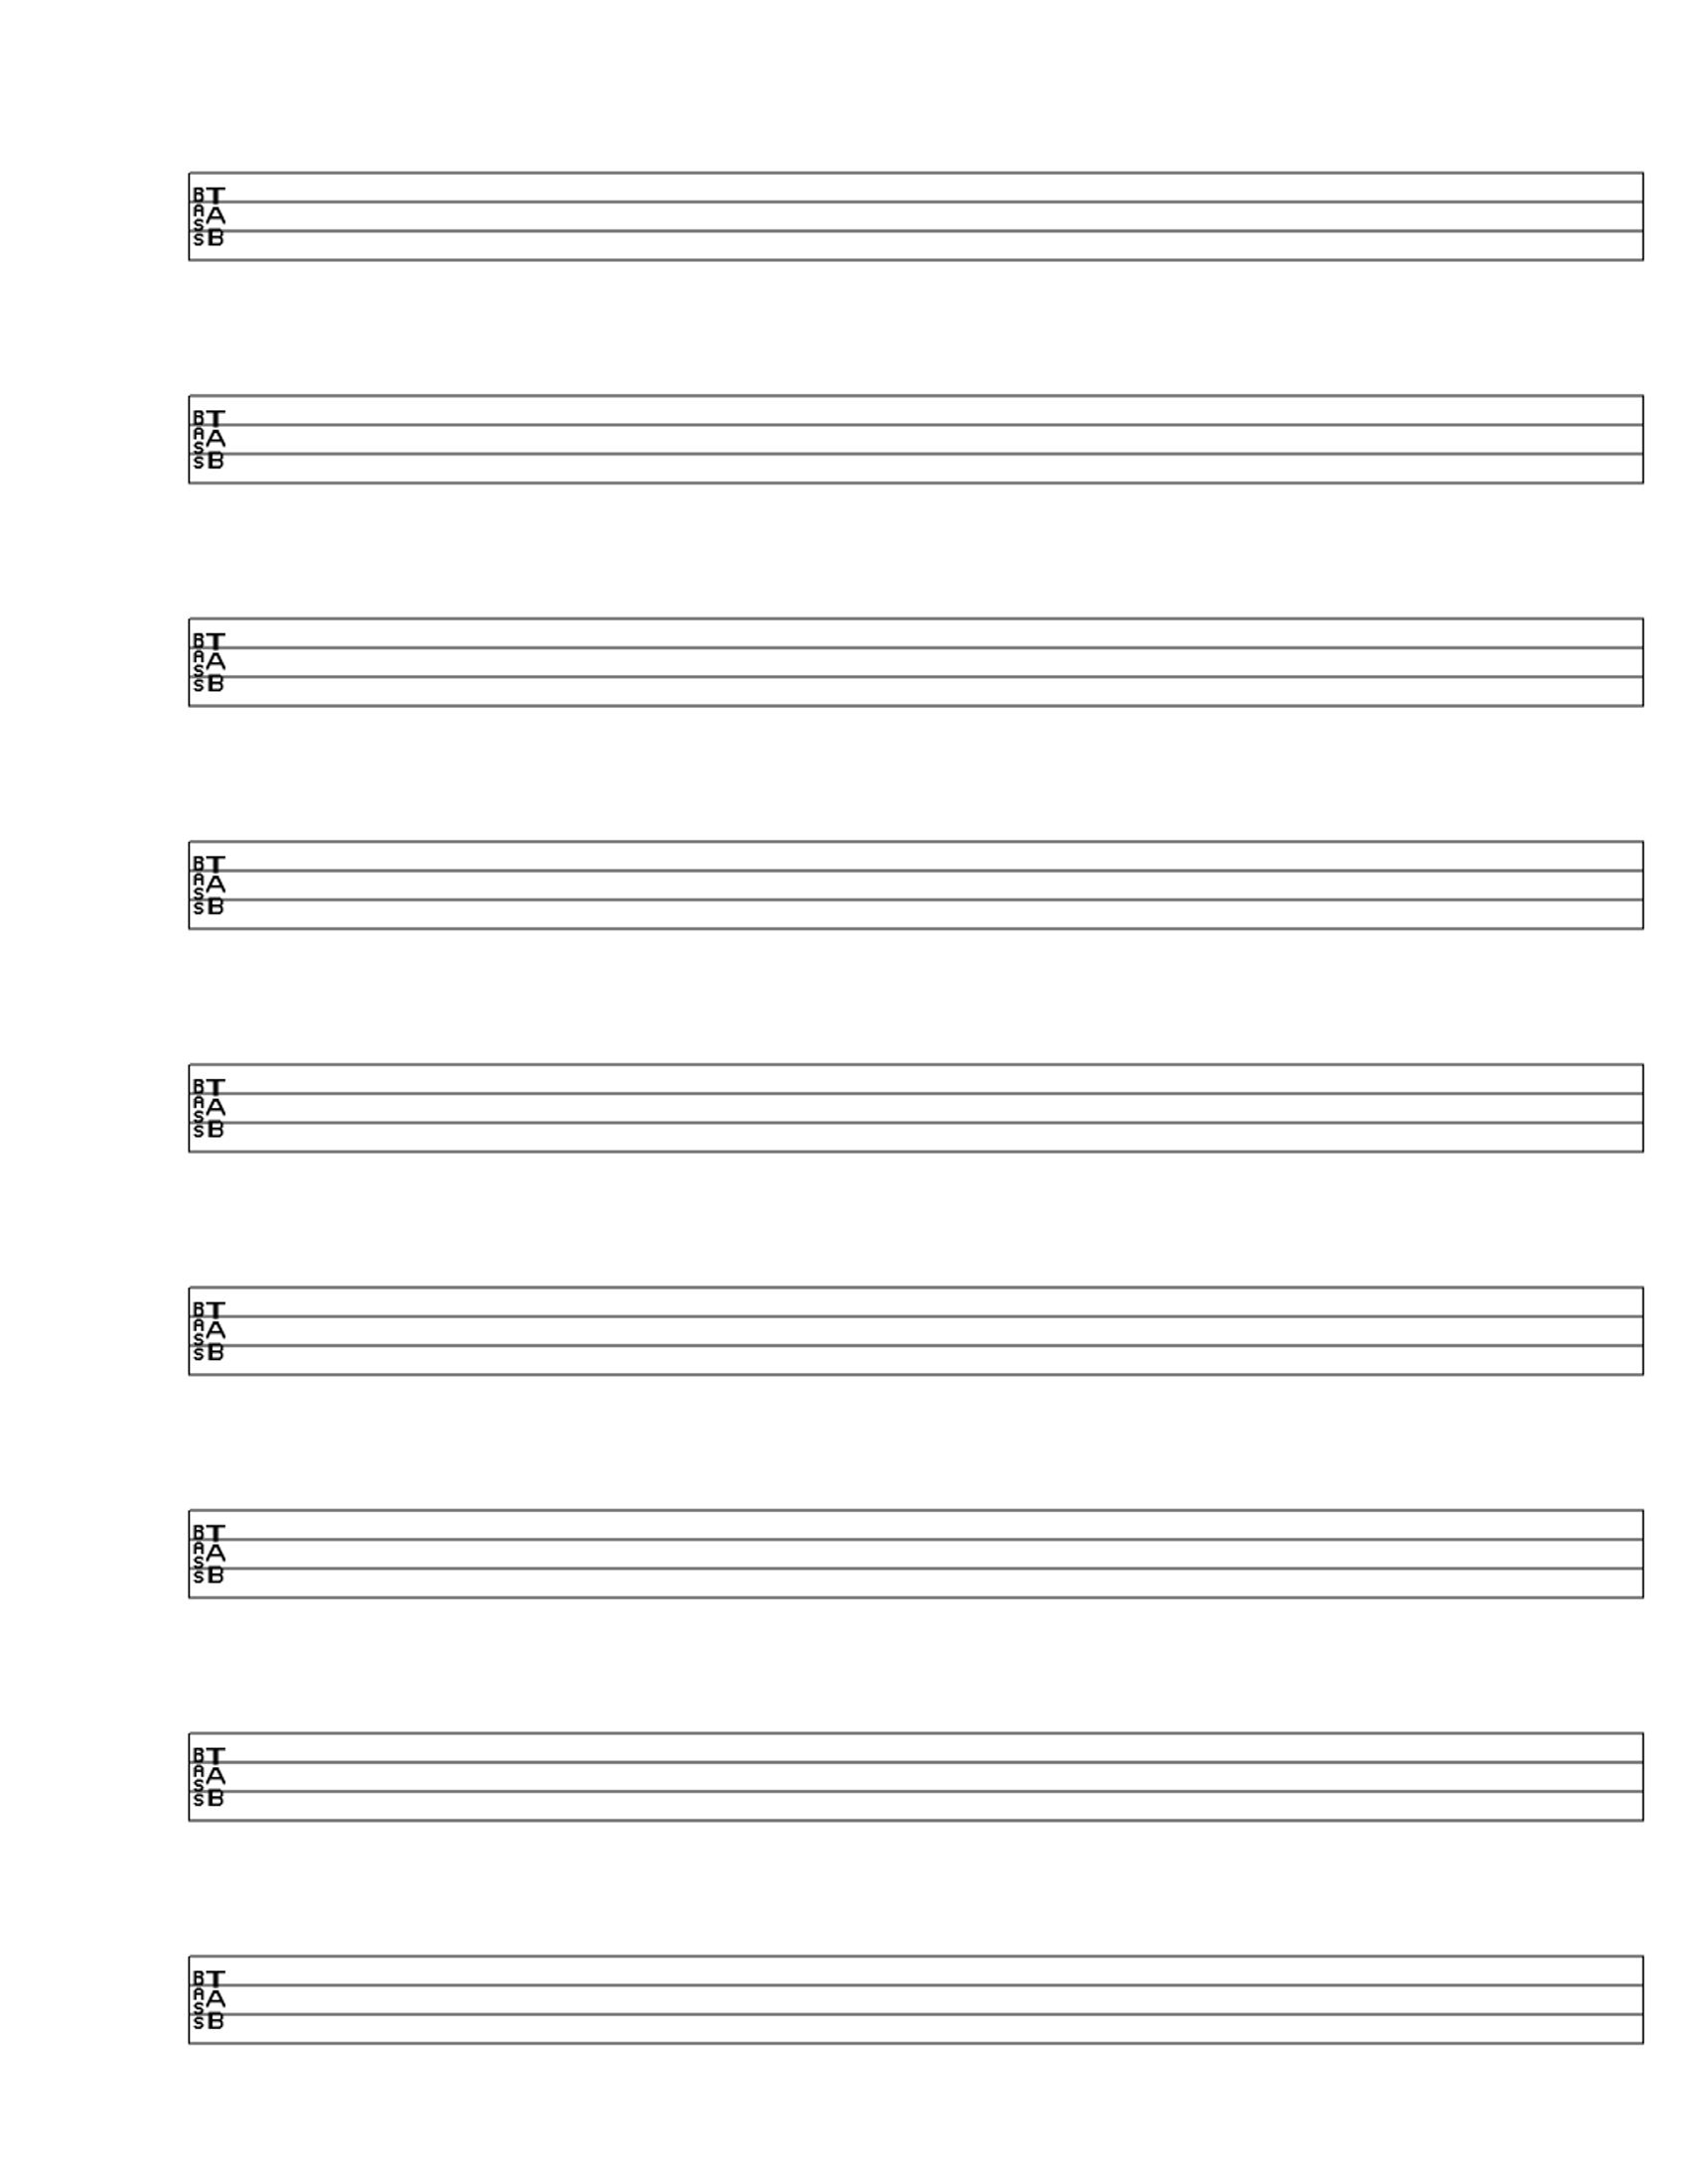 Blank Bass Tab/the Musician | Bass Guitar. In 2019 | Bass In Blank Sheet Music Template For Word